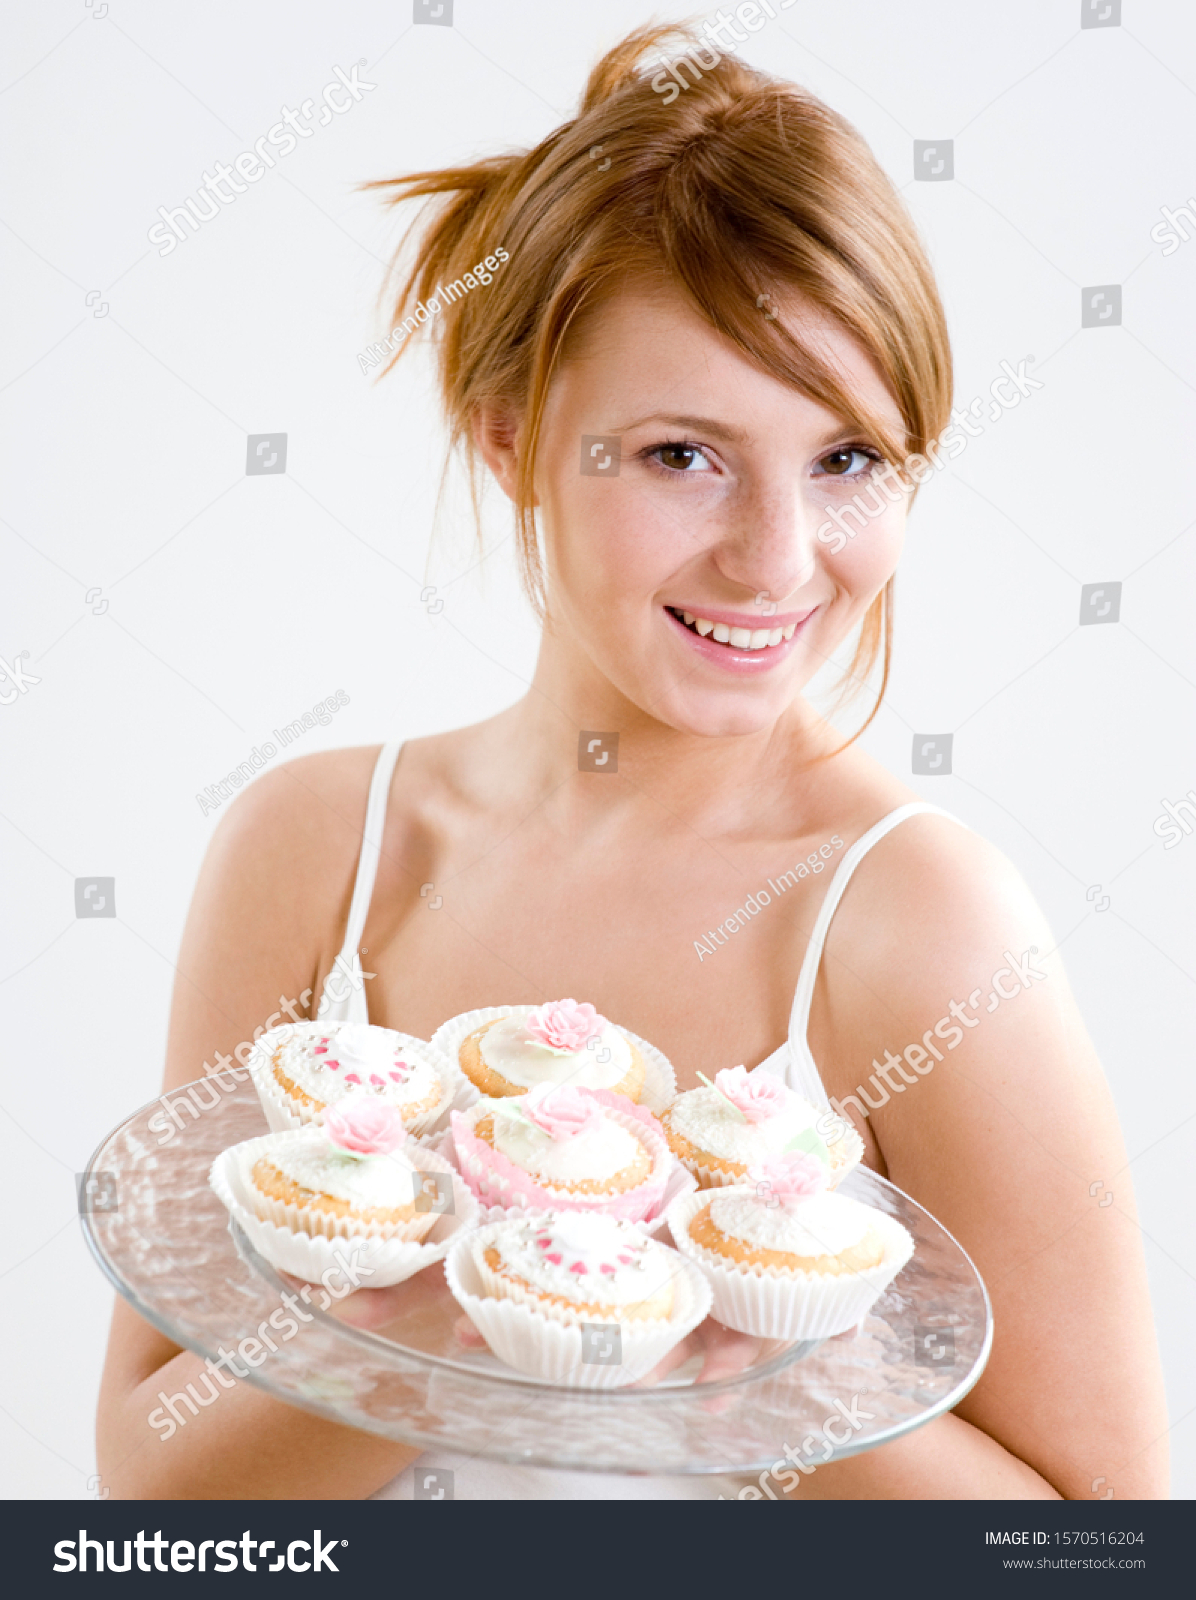 Portrait of young woman holding platter of cupcakes, studio shot #1570516204